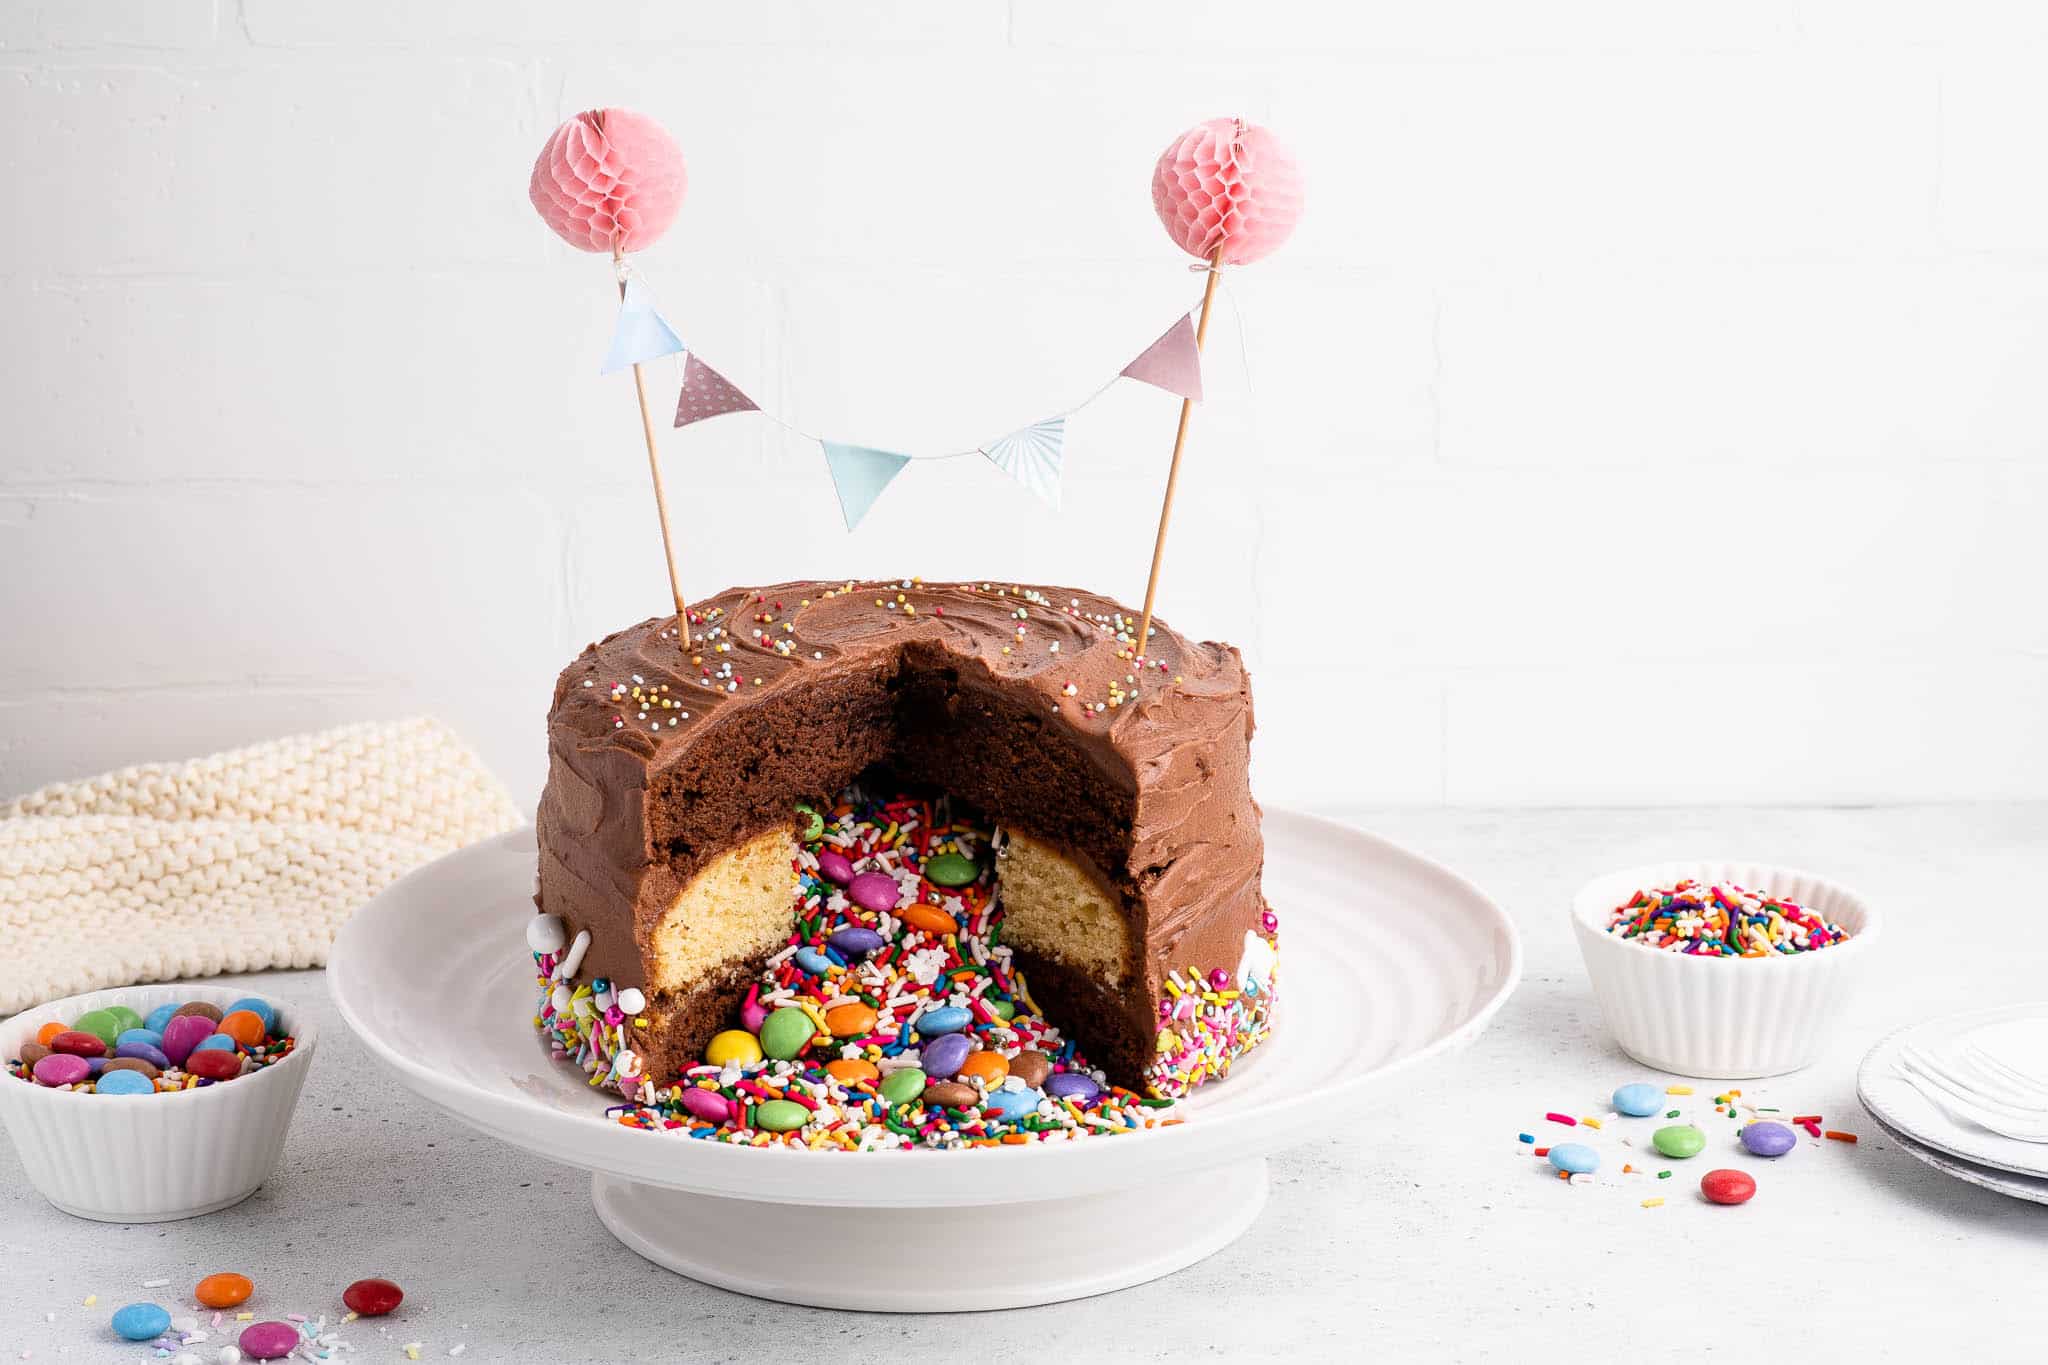 chocolate piñata cake filled with candies and sprinkles